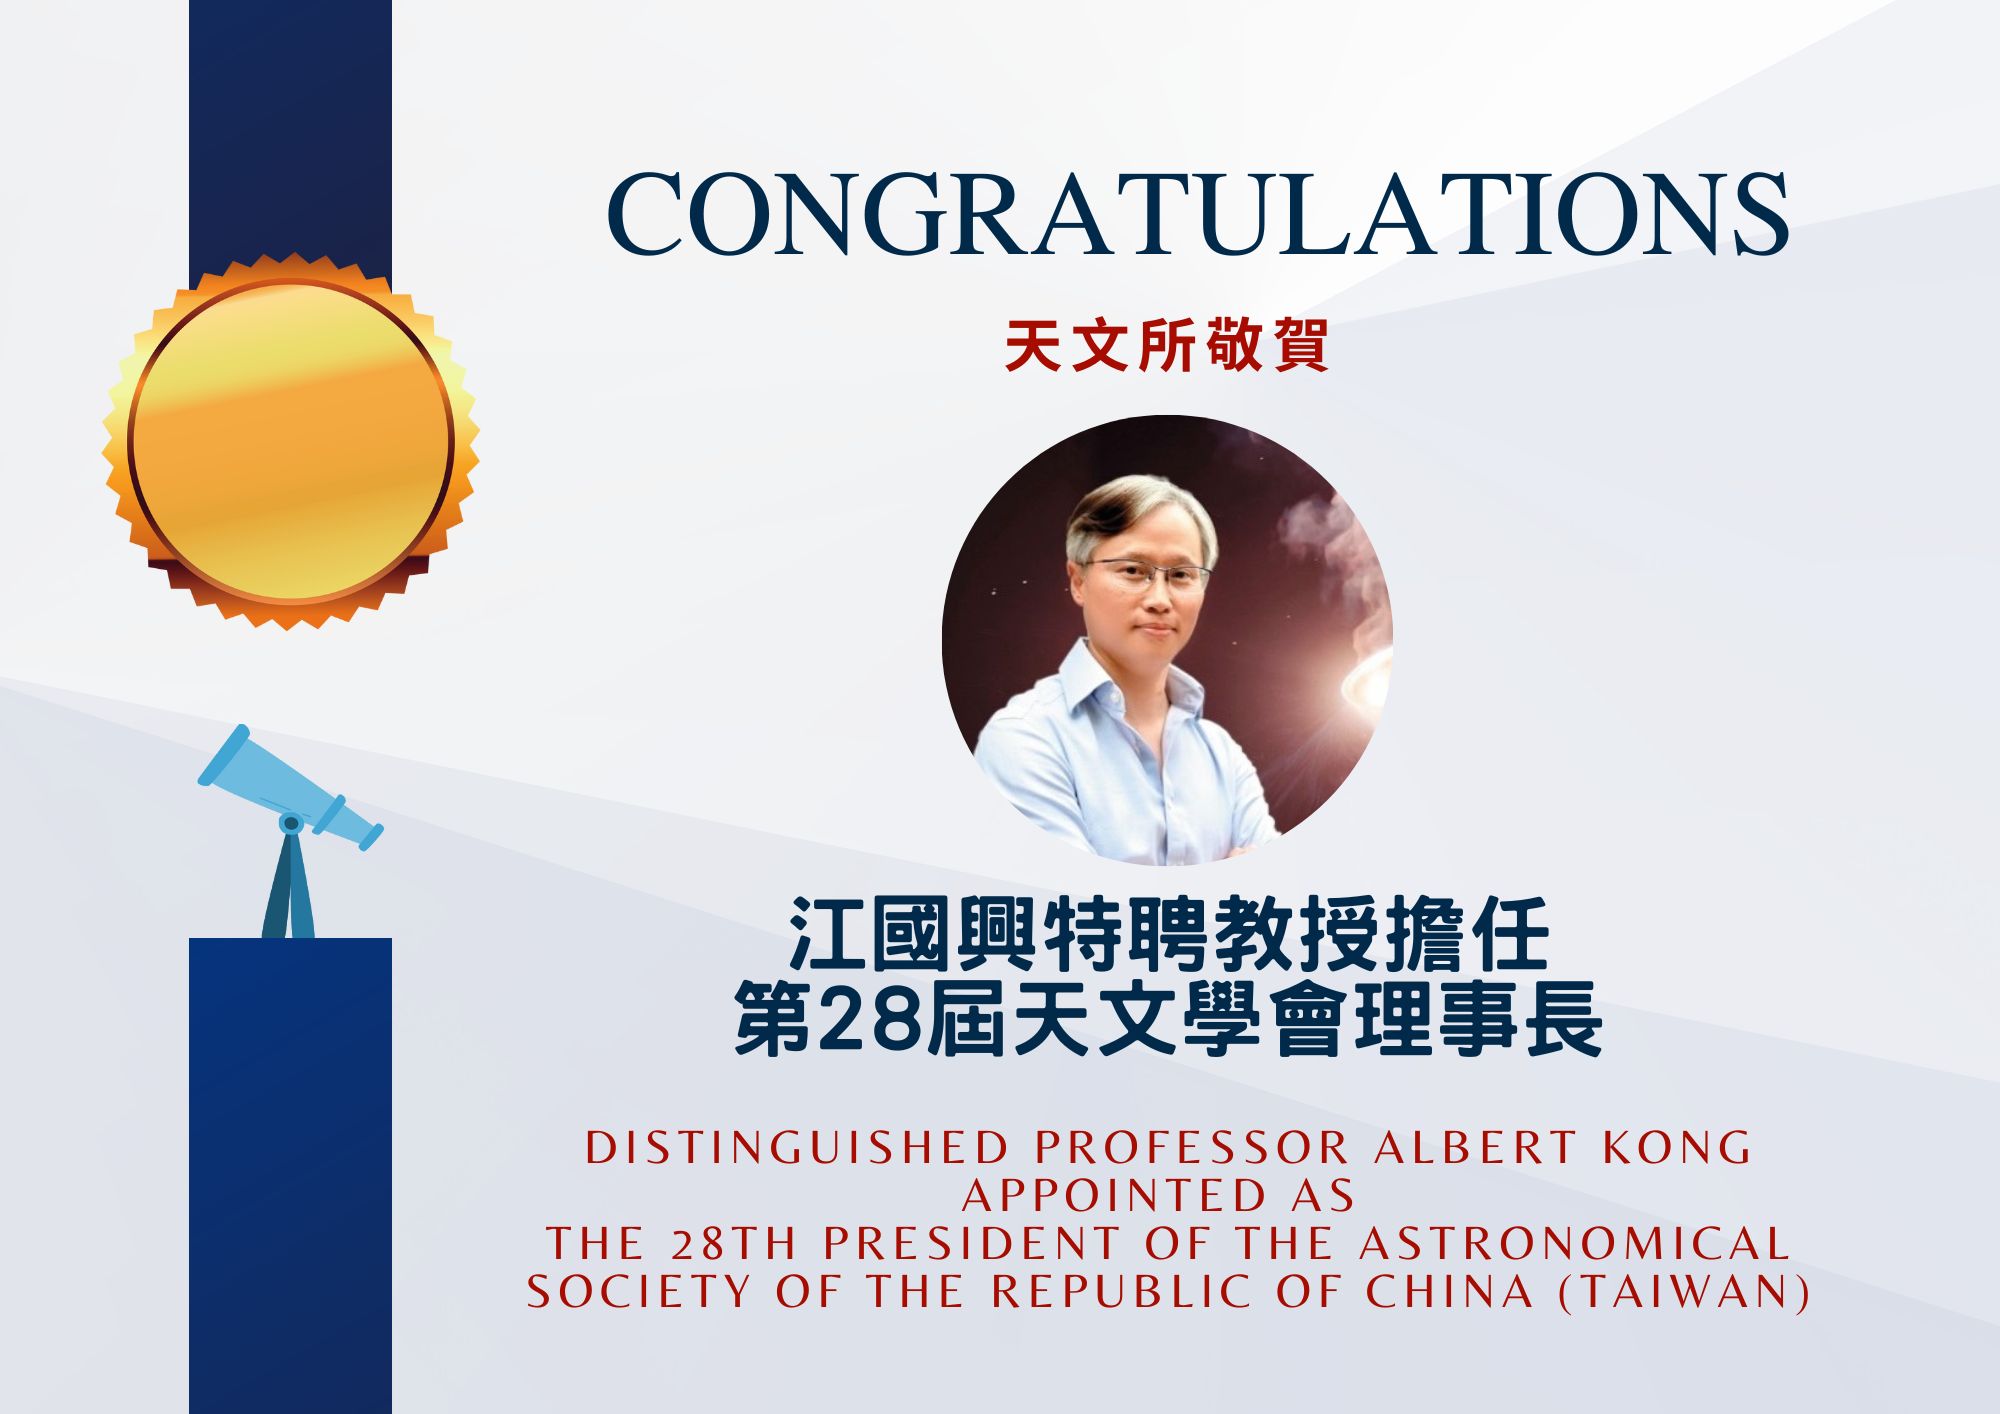 Distinguished professor Albert Kong appointed as the 28th president of he Astronomical Society of Taiwan